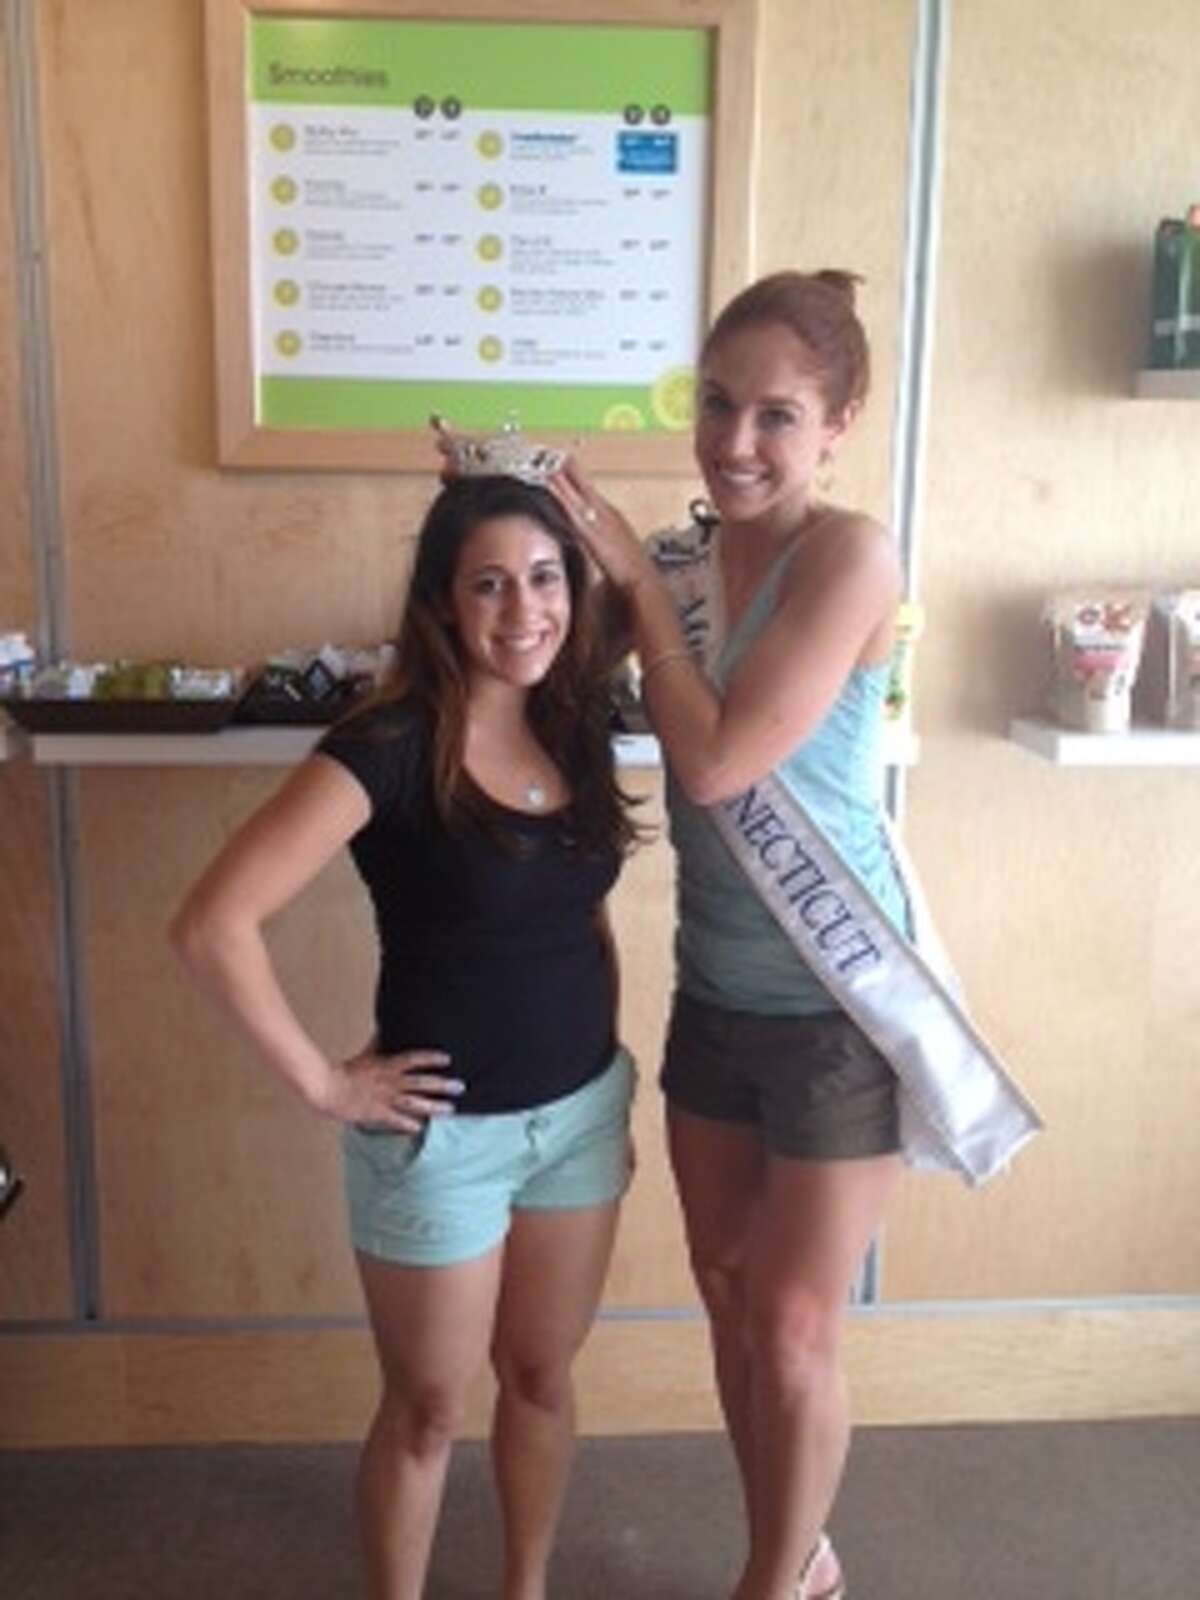 Miss Connecticut Kaitlyn Tarpey (right), poses with a customer at Green & Tonic in Darien on Friday, June 28.